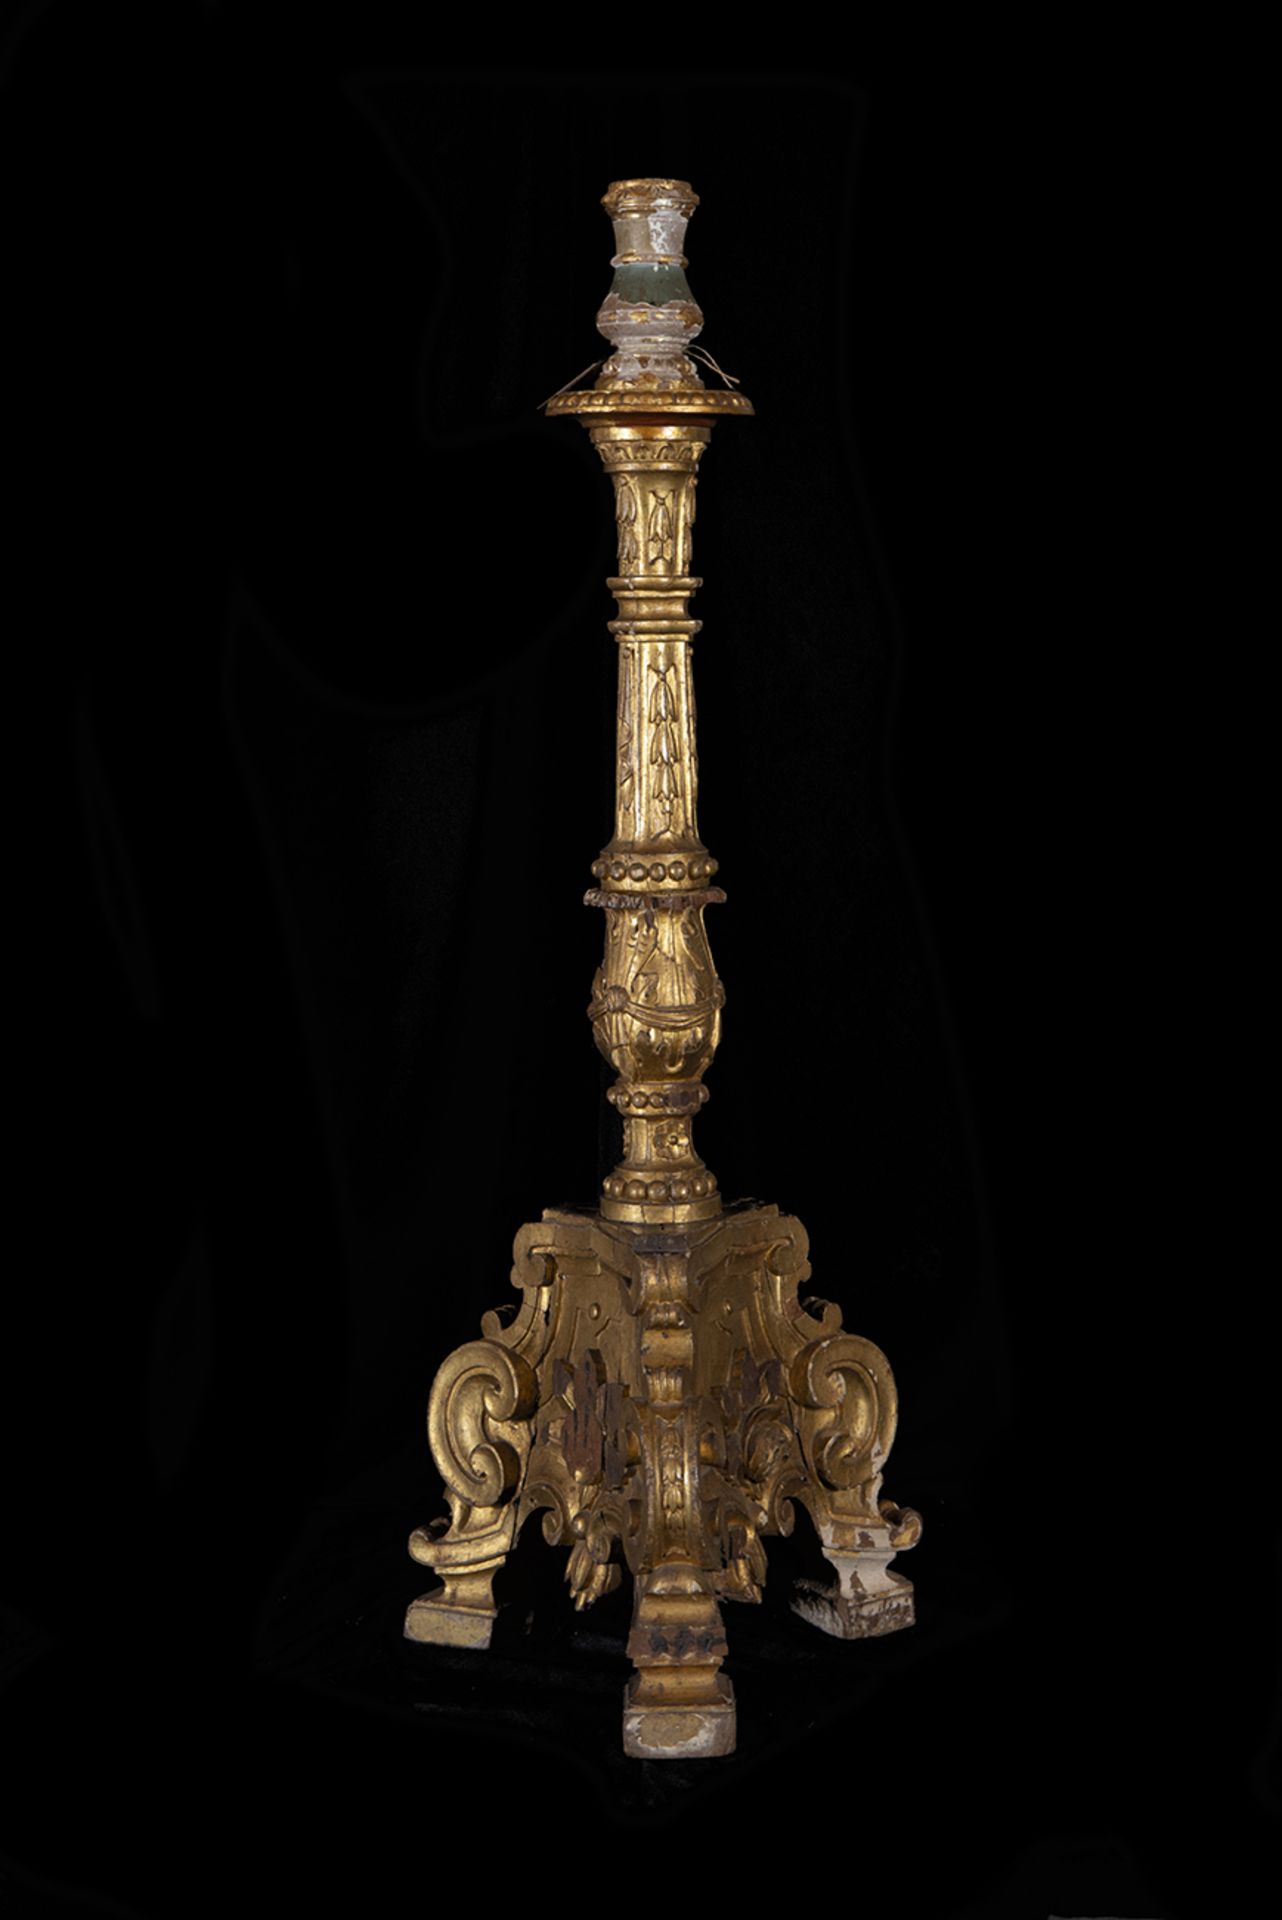 Large Portuguese torch holder in gilded wood, 18th century - Image 3 of 7